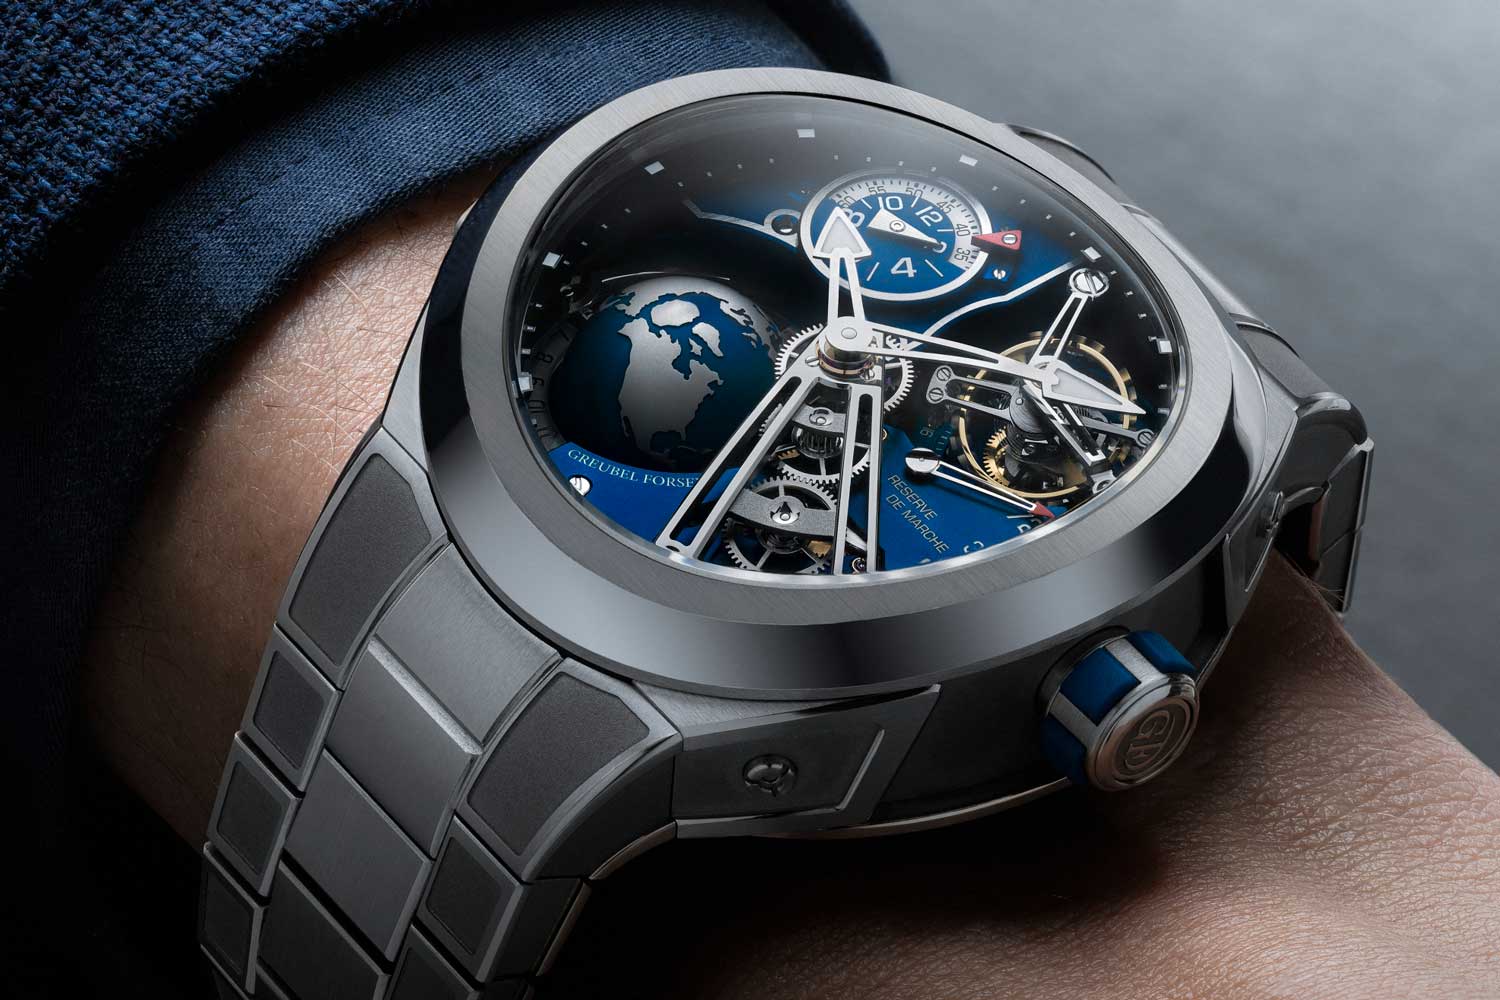 The new GMT Sport is offered on an integrated three-link bracelet, the first of its kind for a Greubel Forsey watch.